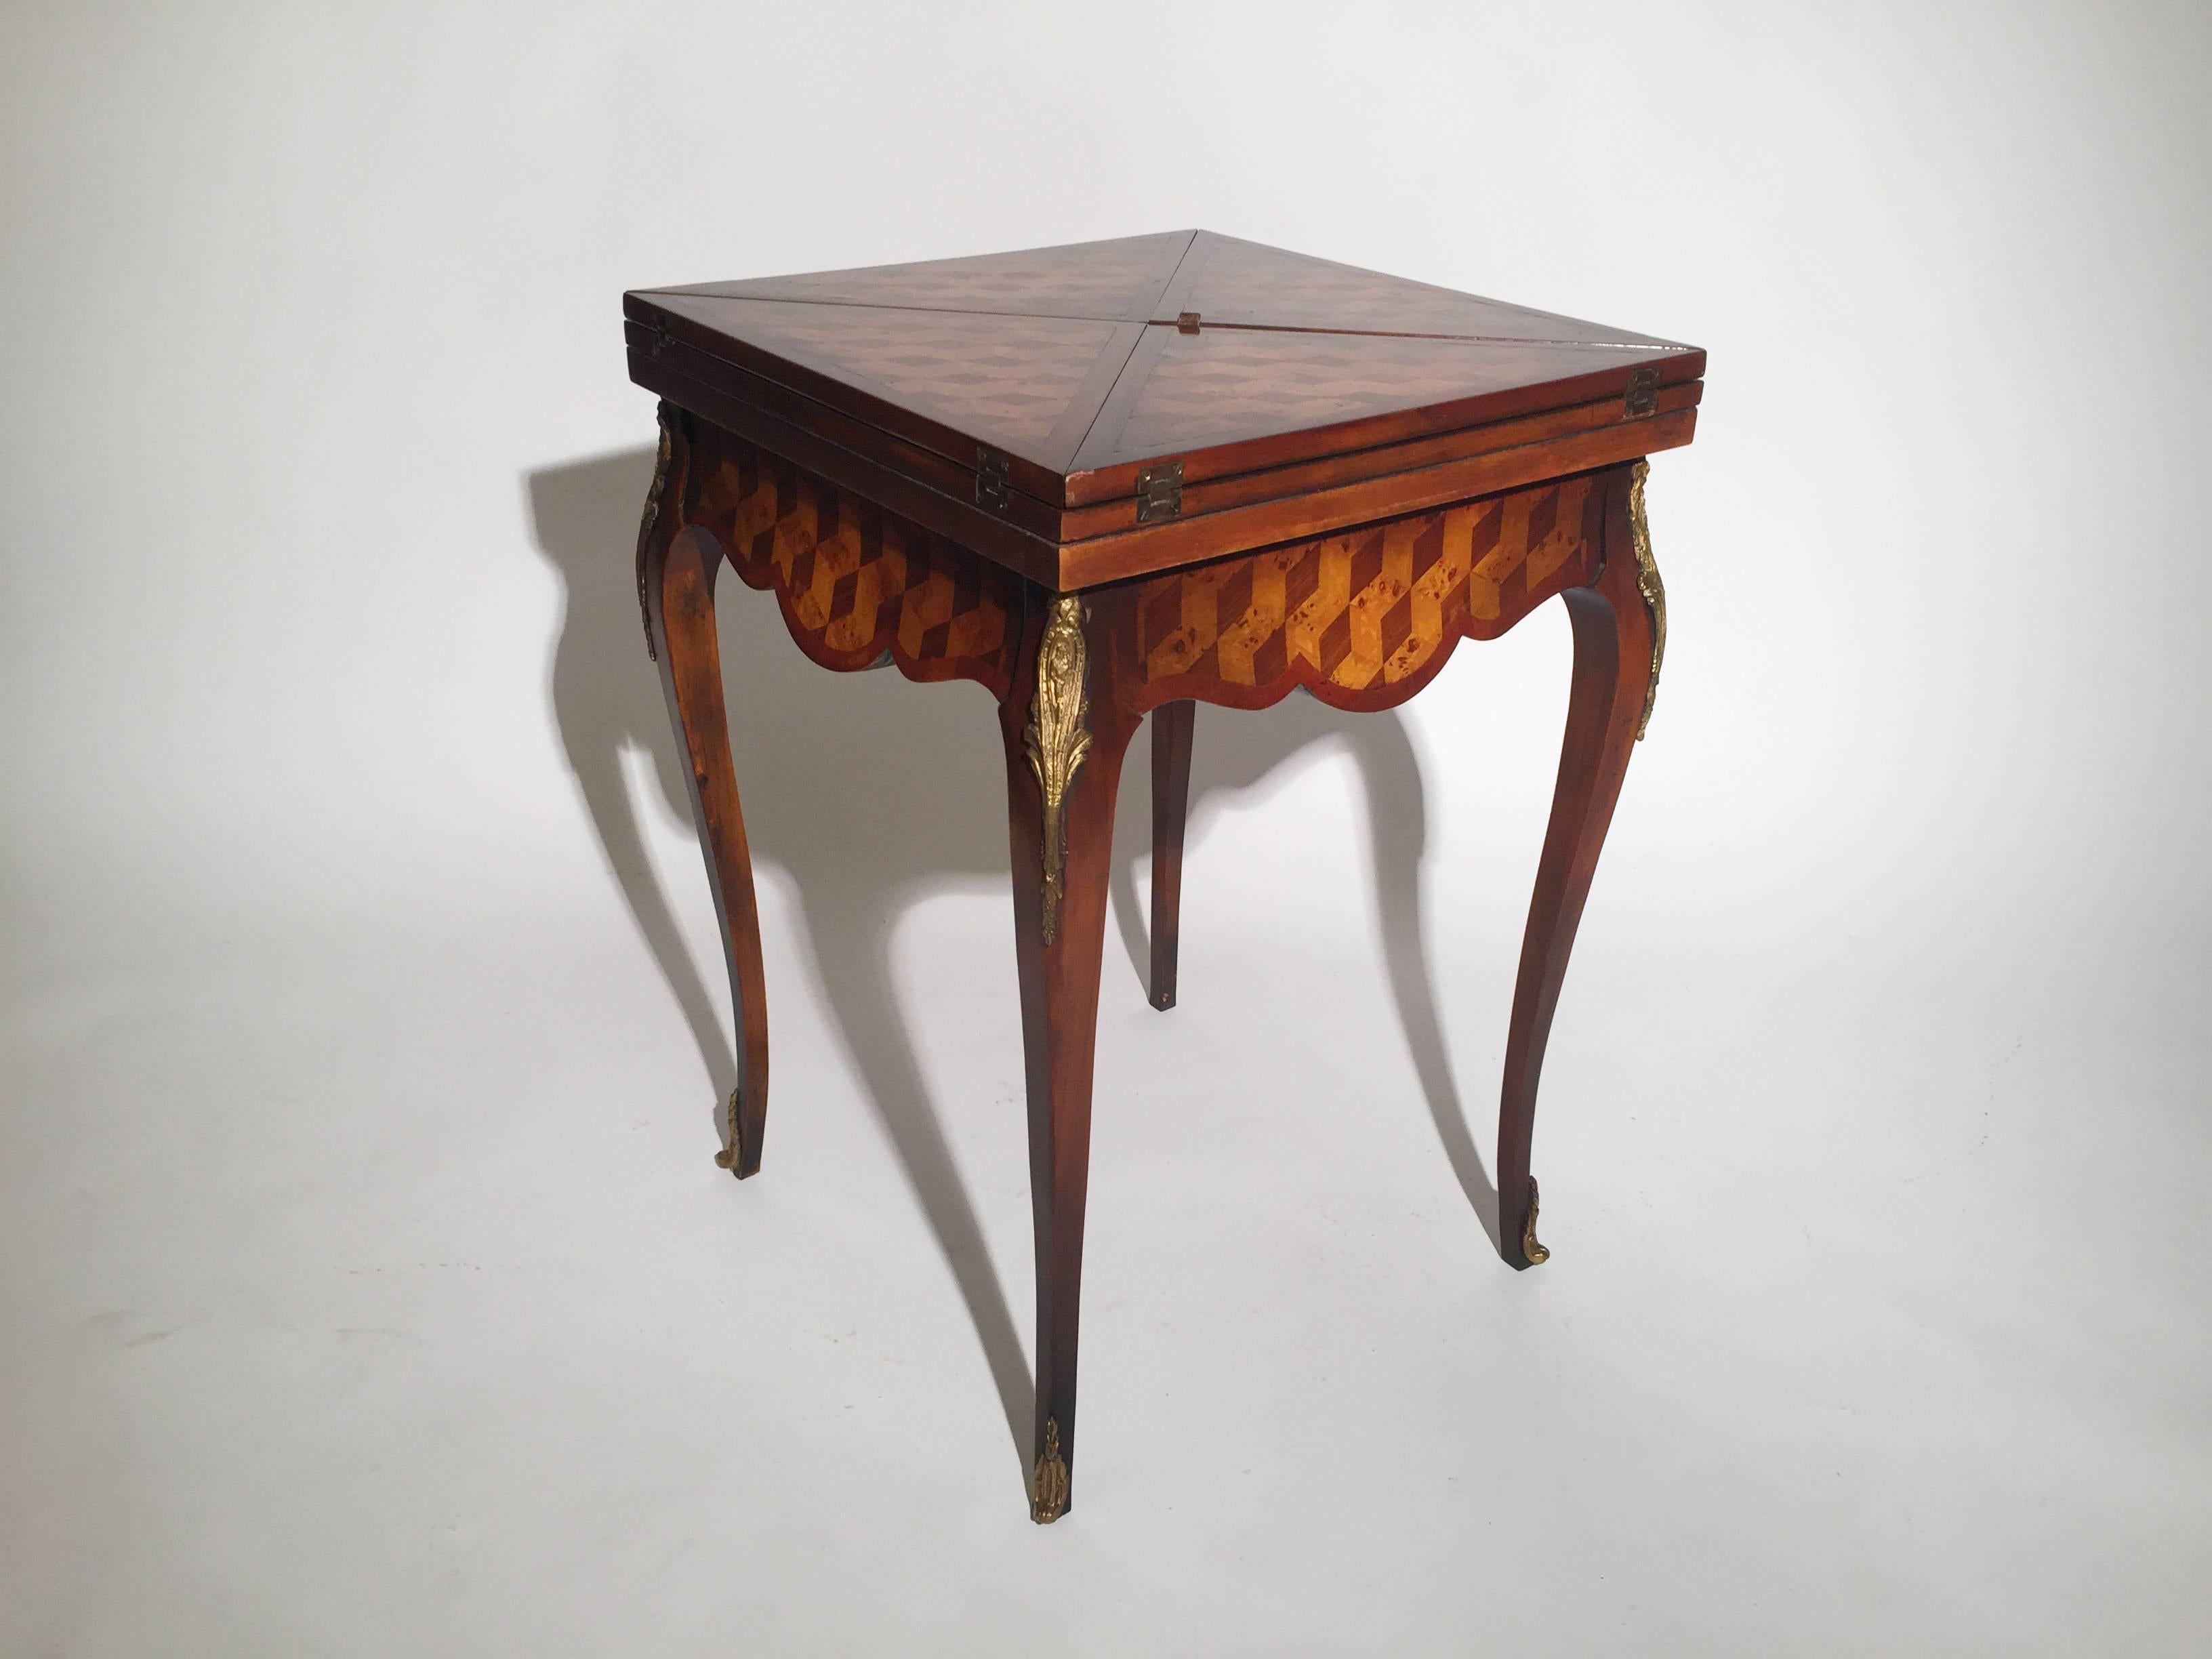 The table with four leaves that flip open to reveal a leather card playing surface and inlaid chess board. The apron concealing a single central drawer. The graceful curved legs with cast brass mounts. By Theodore Alexander in mahogany, and burl